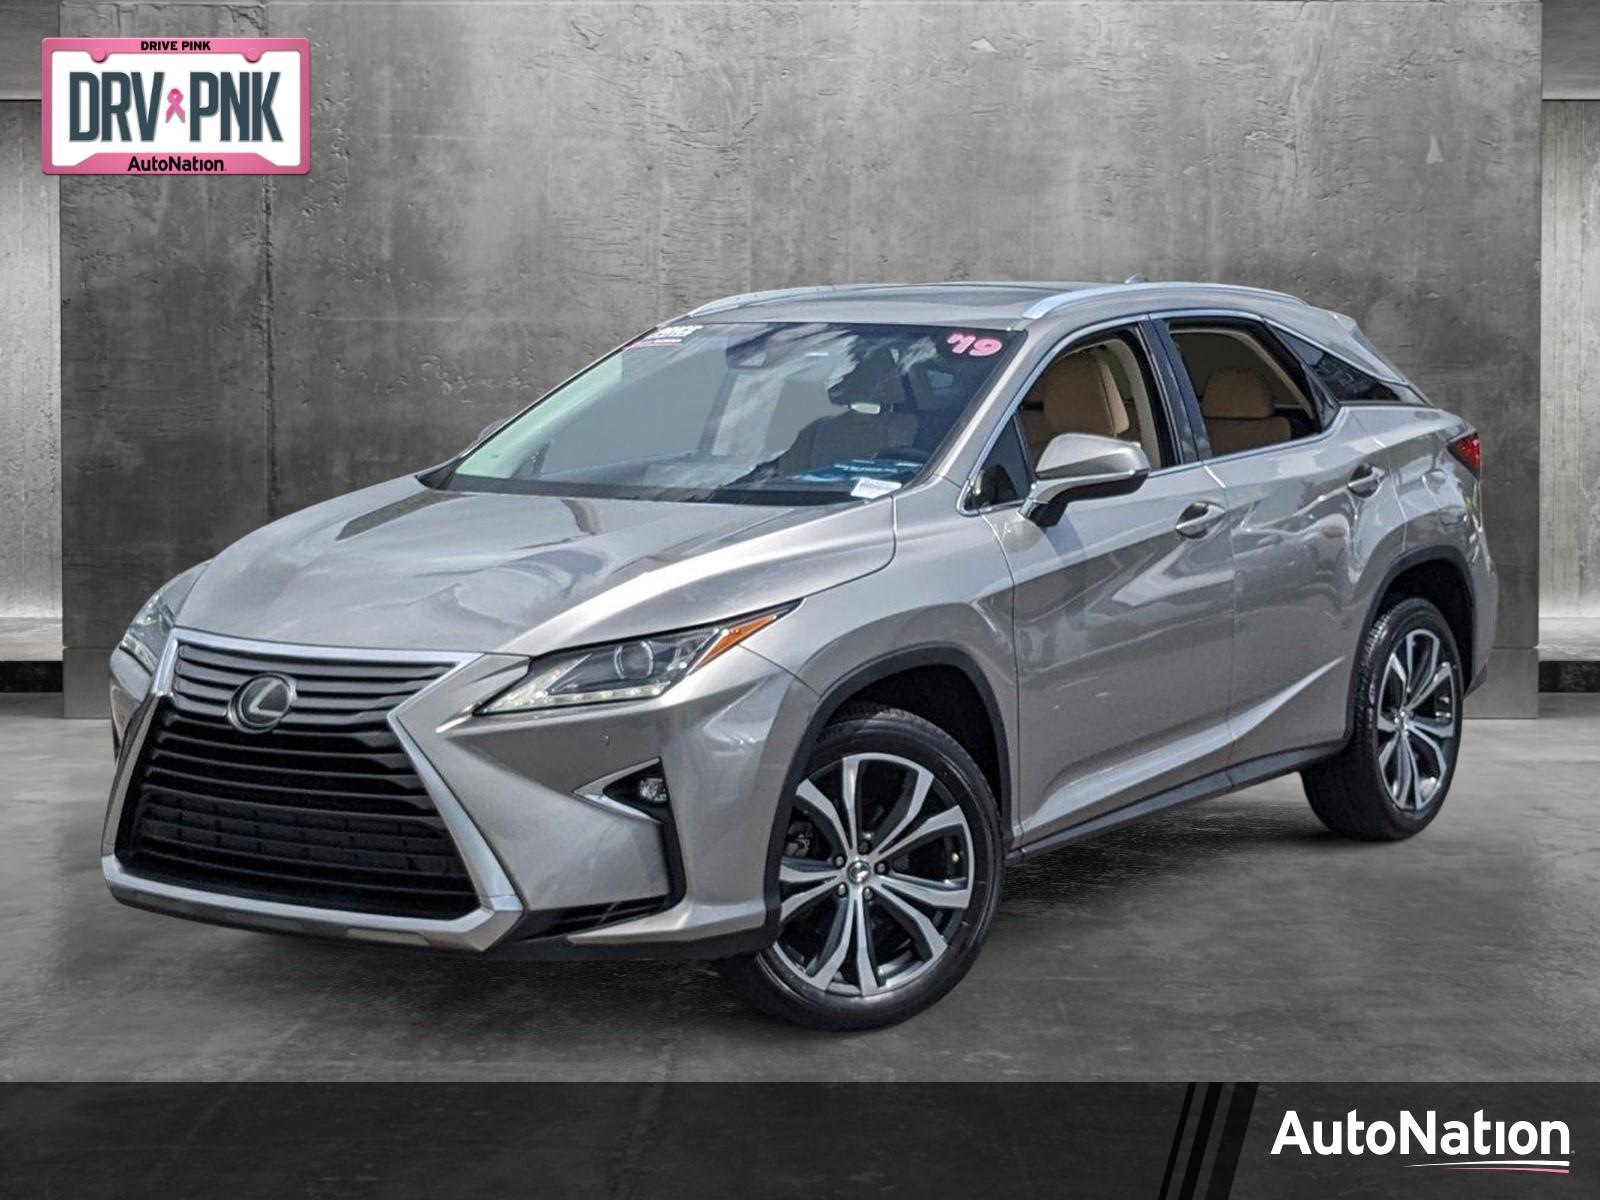 2019 Lexus RX 350 Vehicle Photo in Clearwater, FL 33761